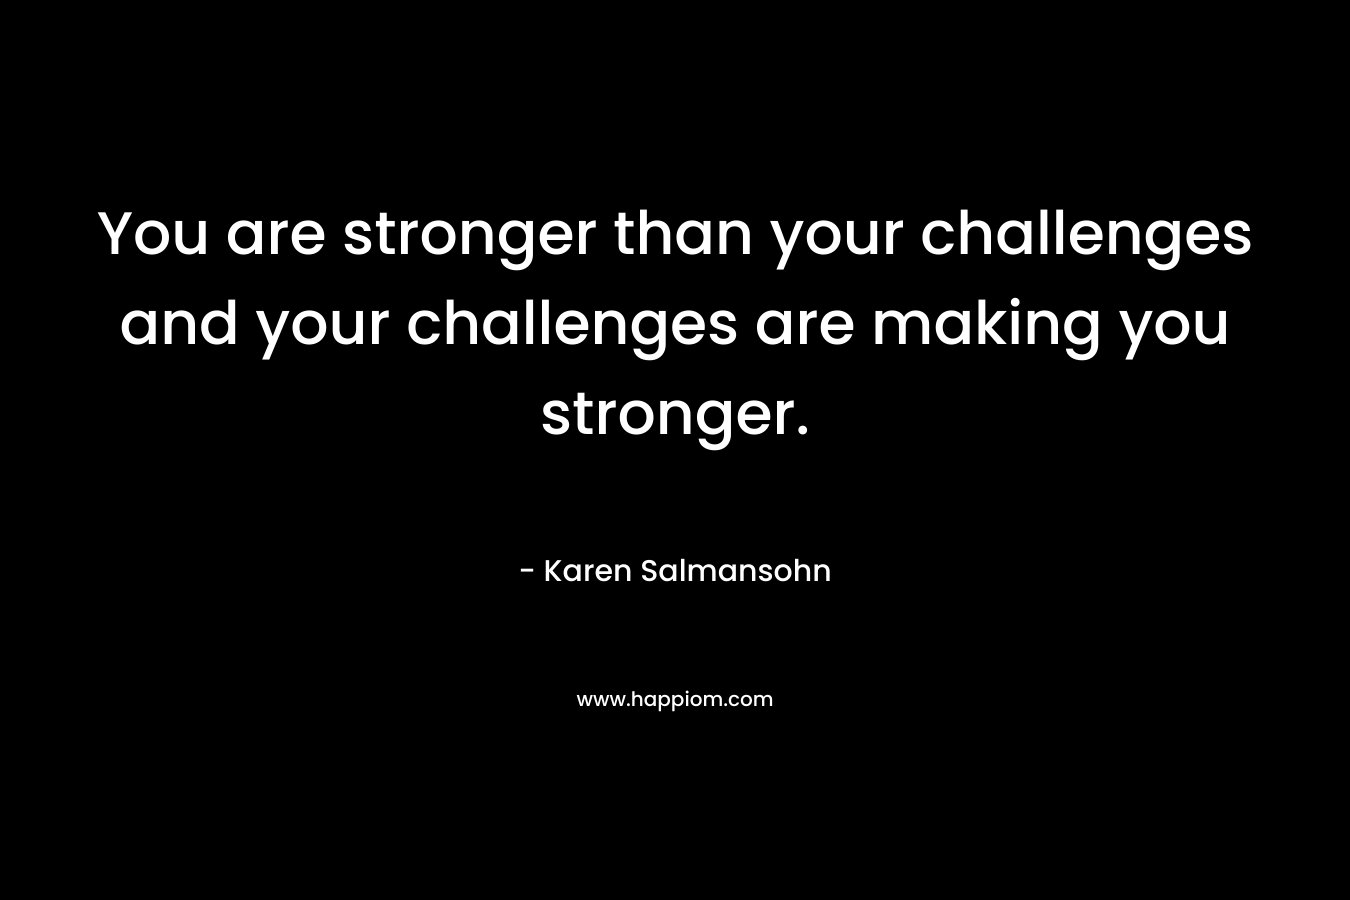 You are stronger than your challenges and your challenges are making you stronger.